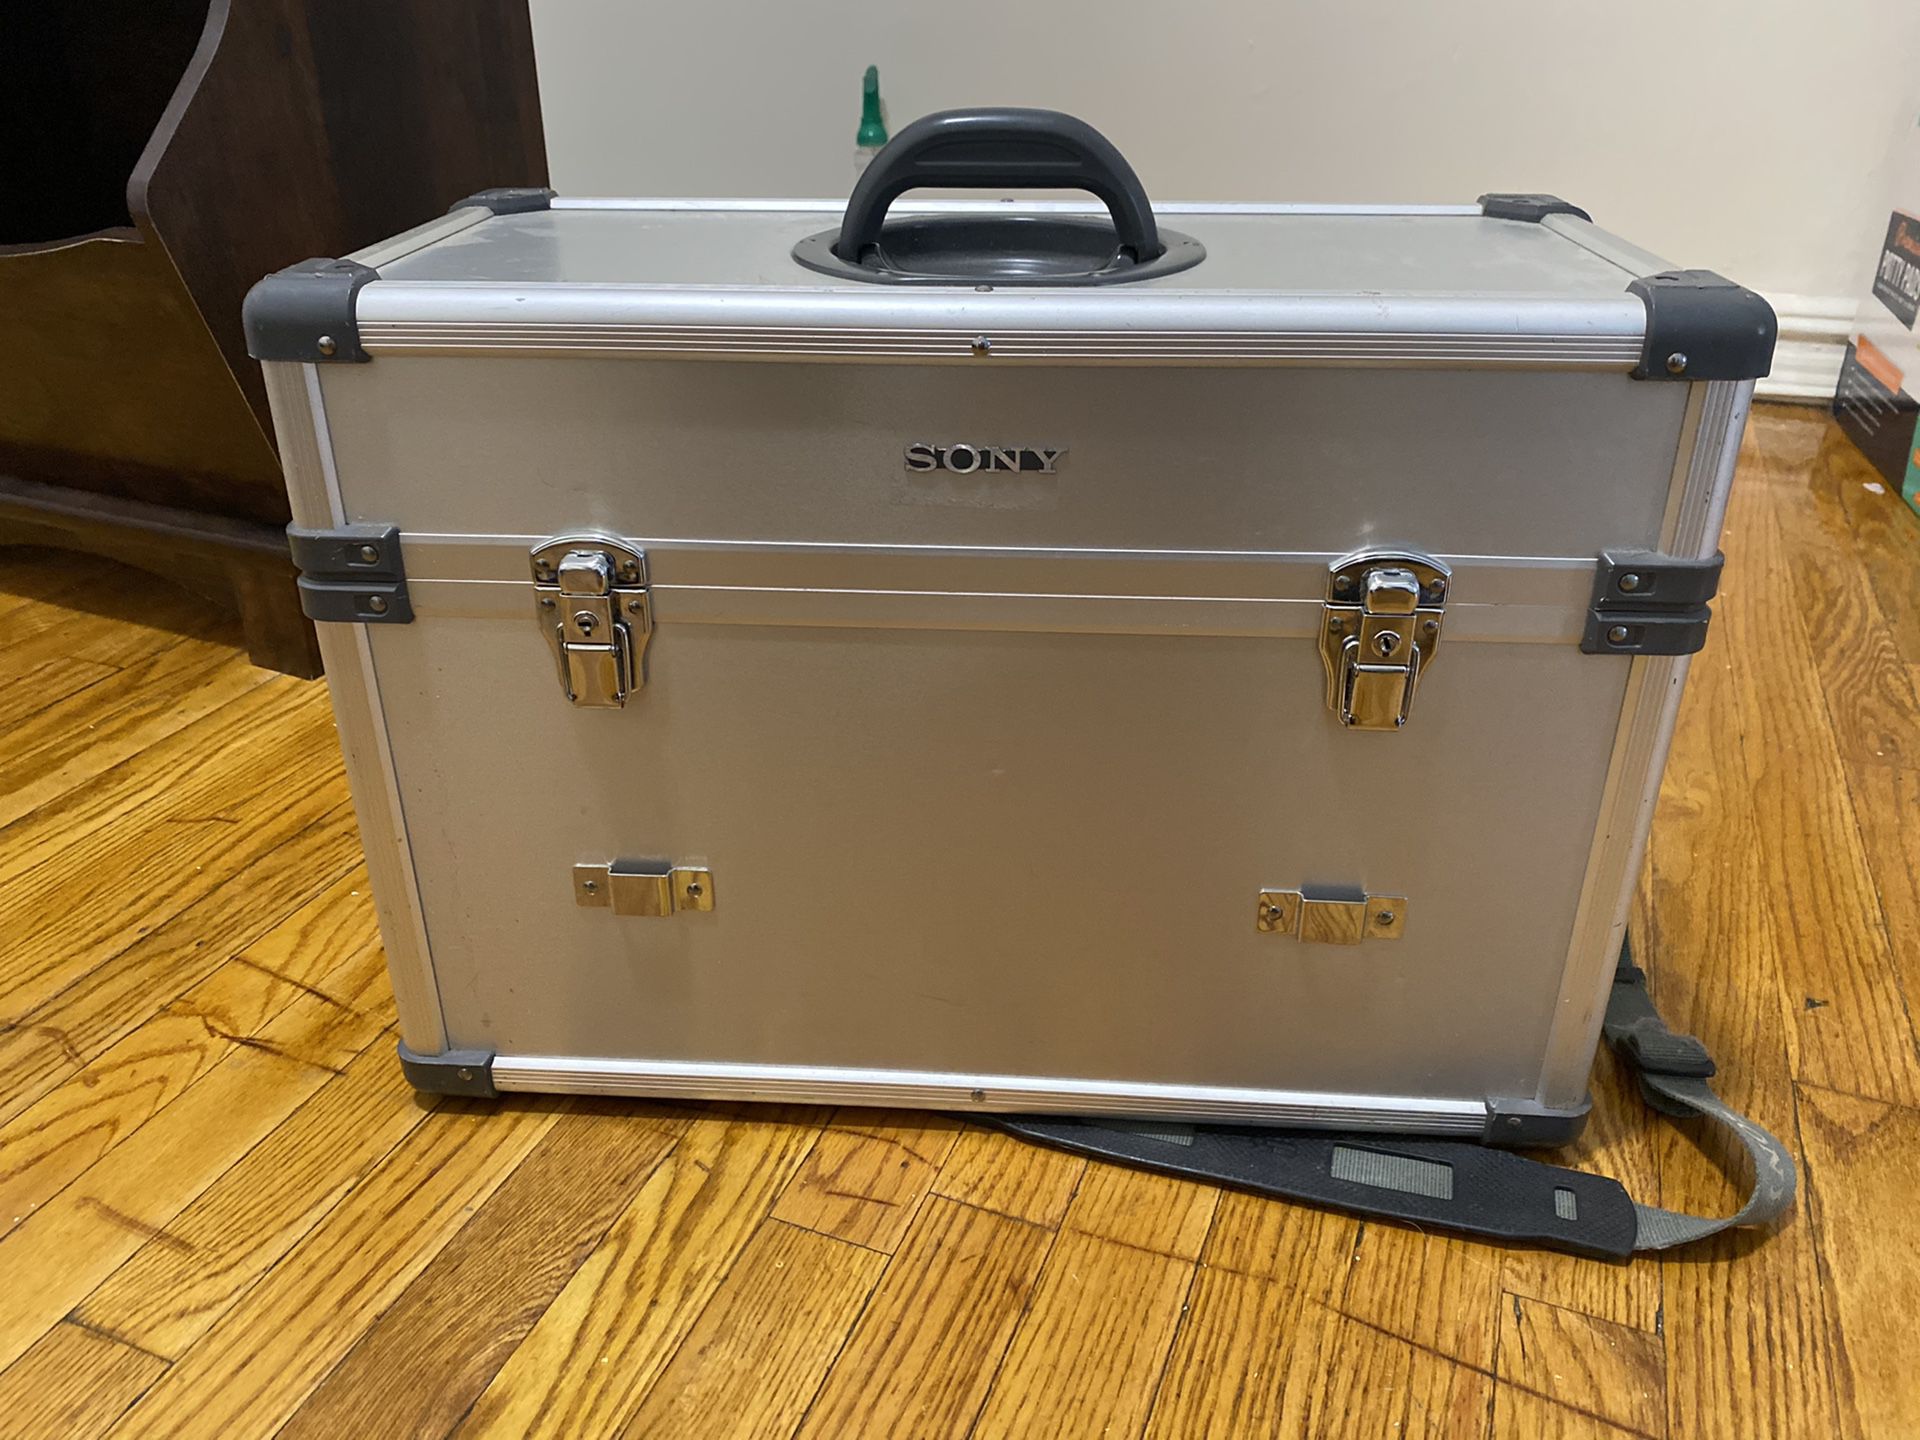 Sony camera and lens carrying case